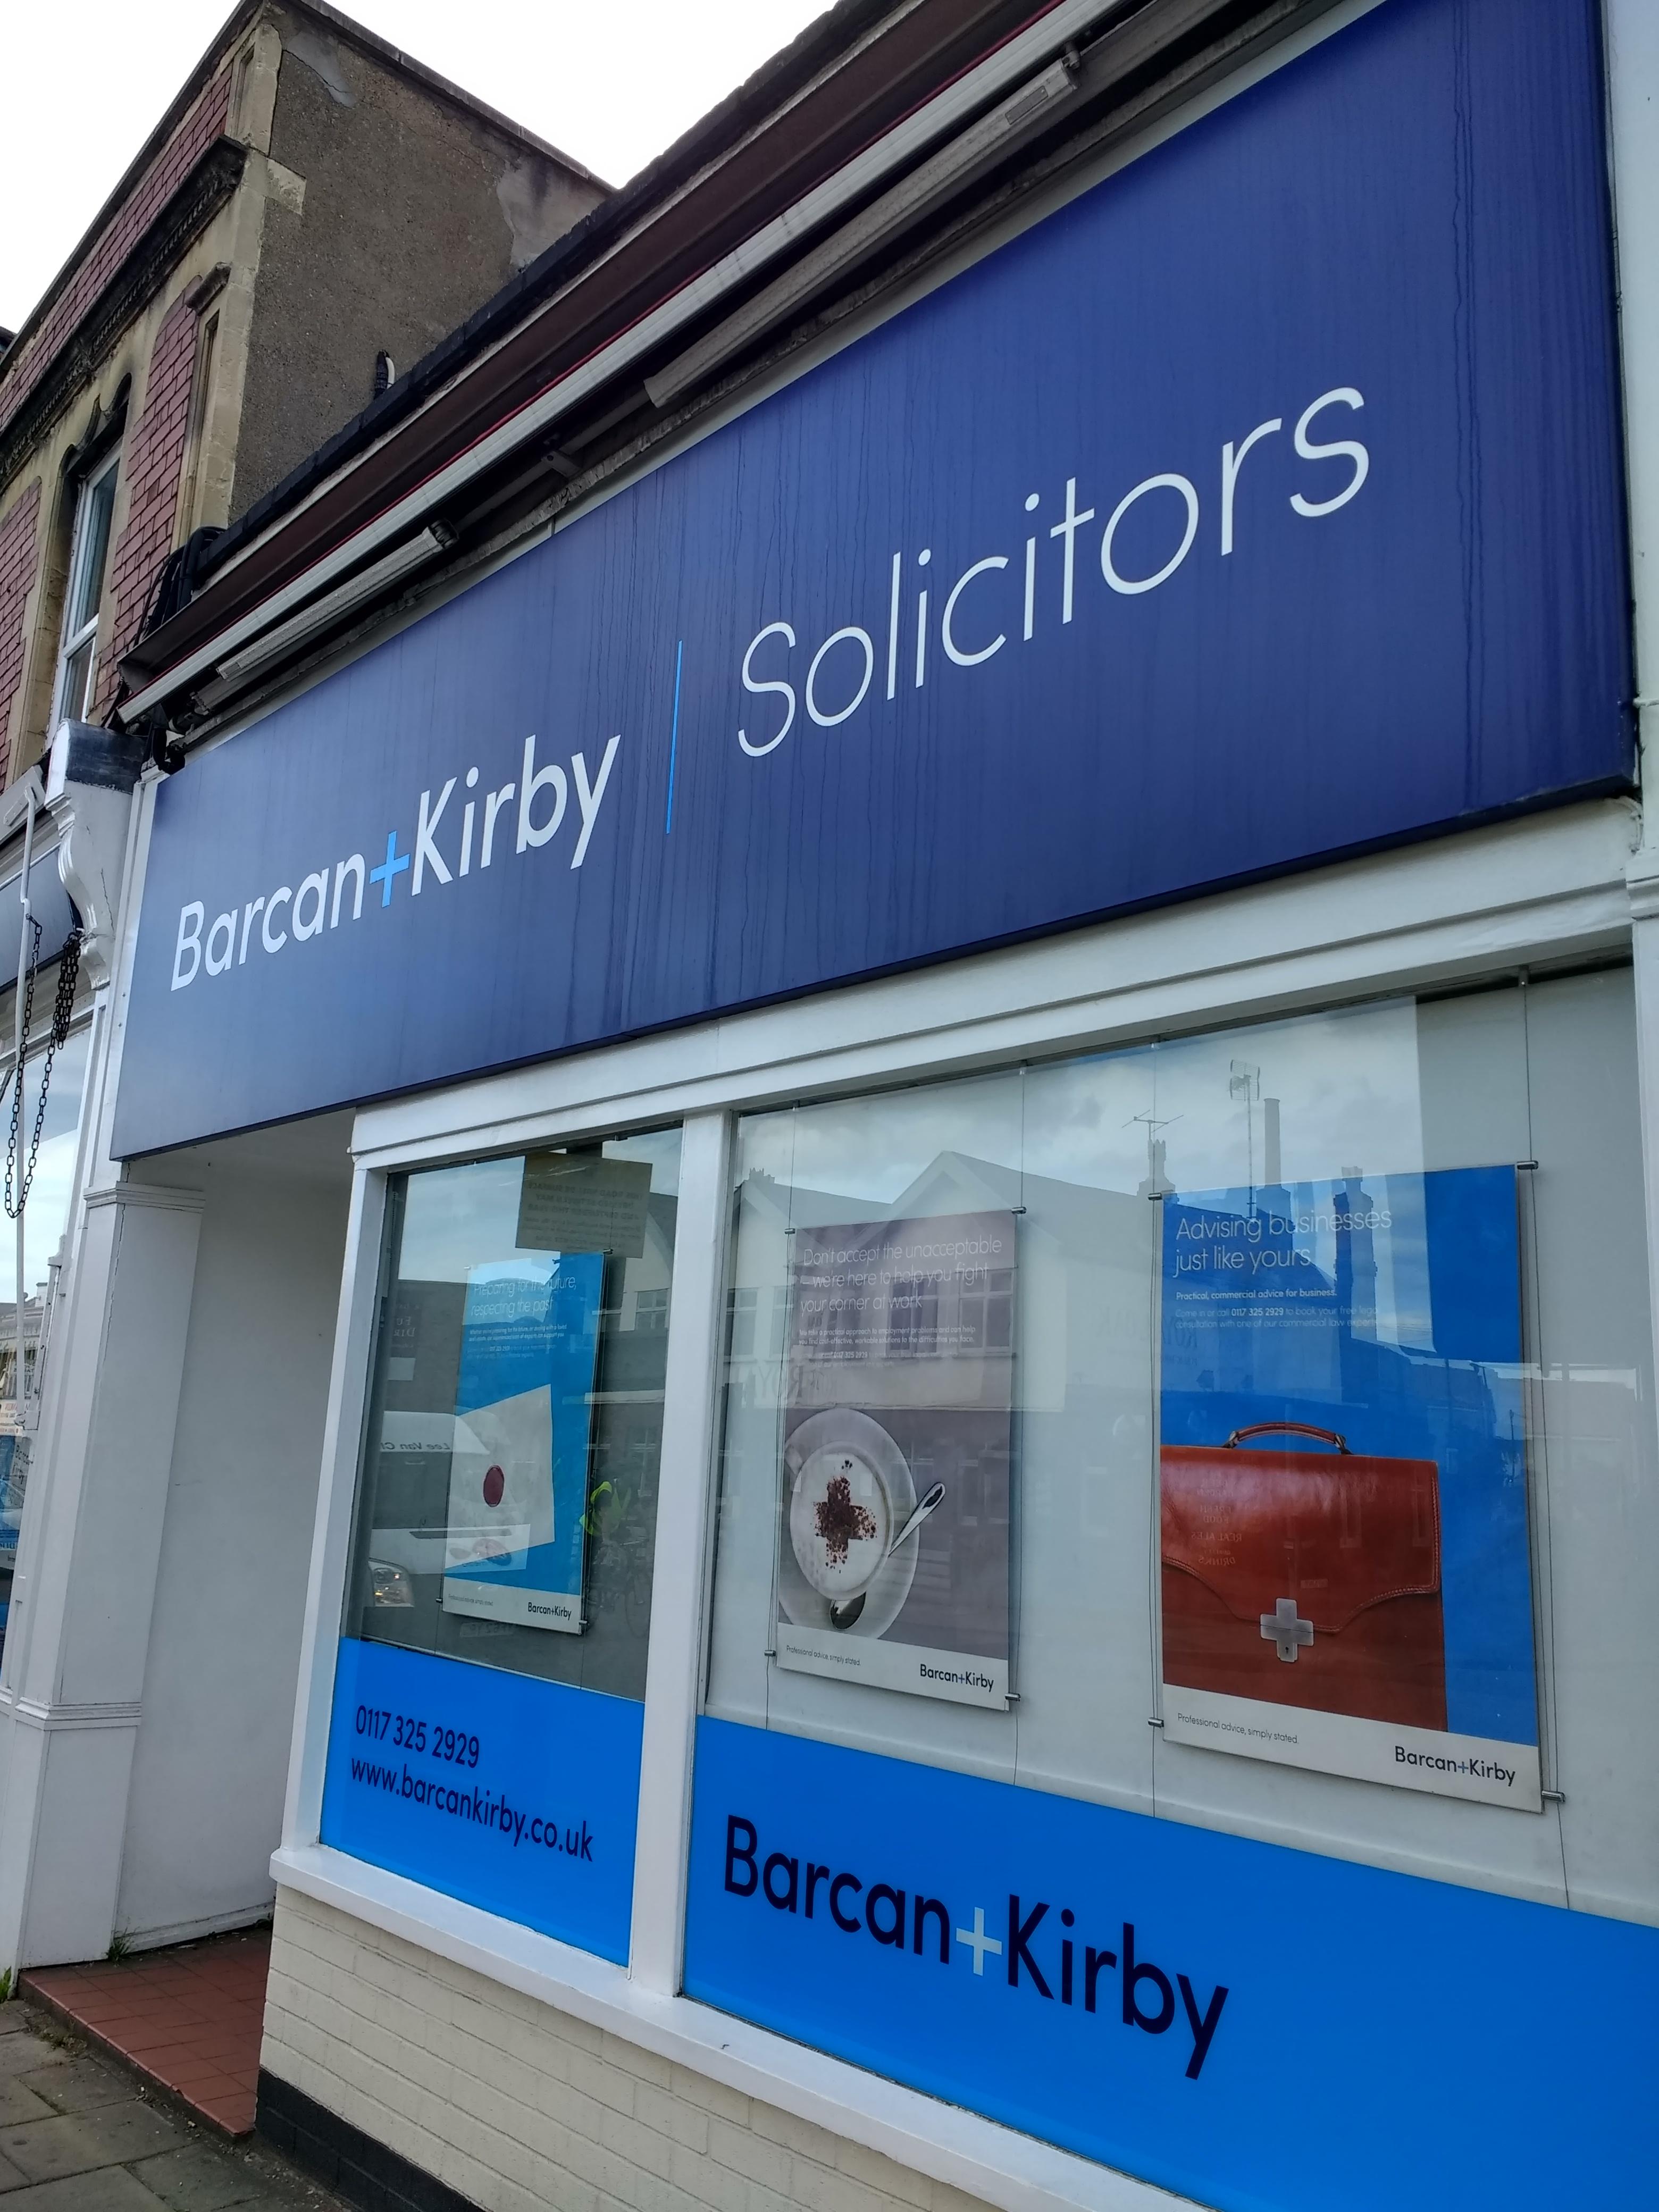 Barcan+Kirby Solicitors